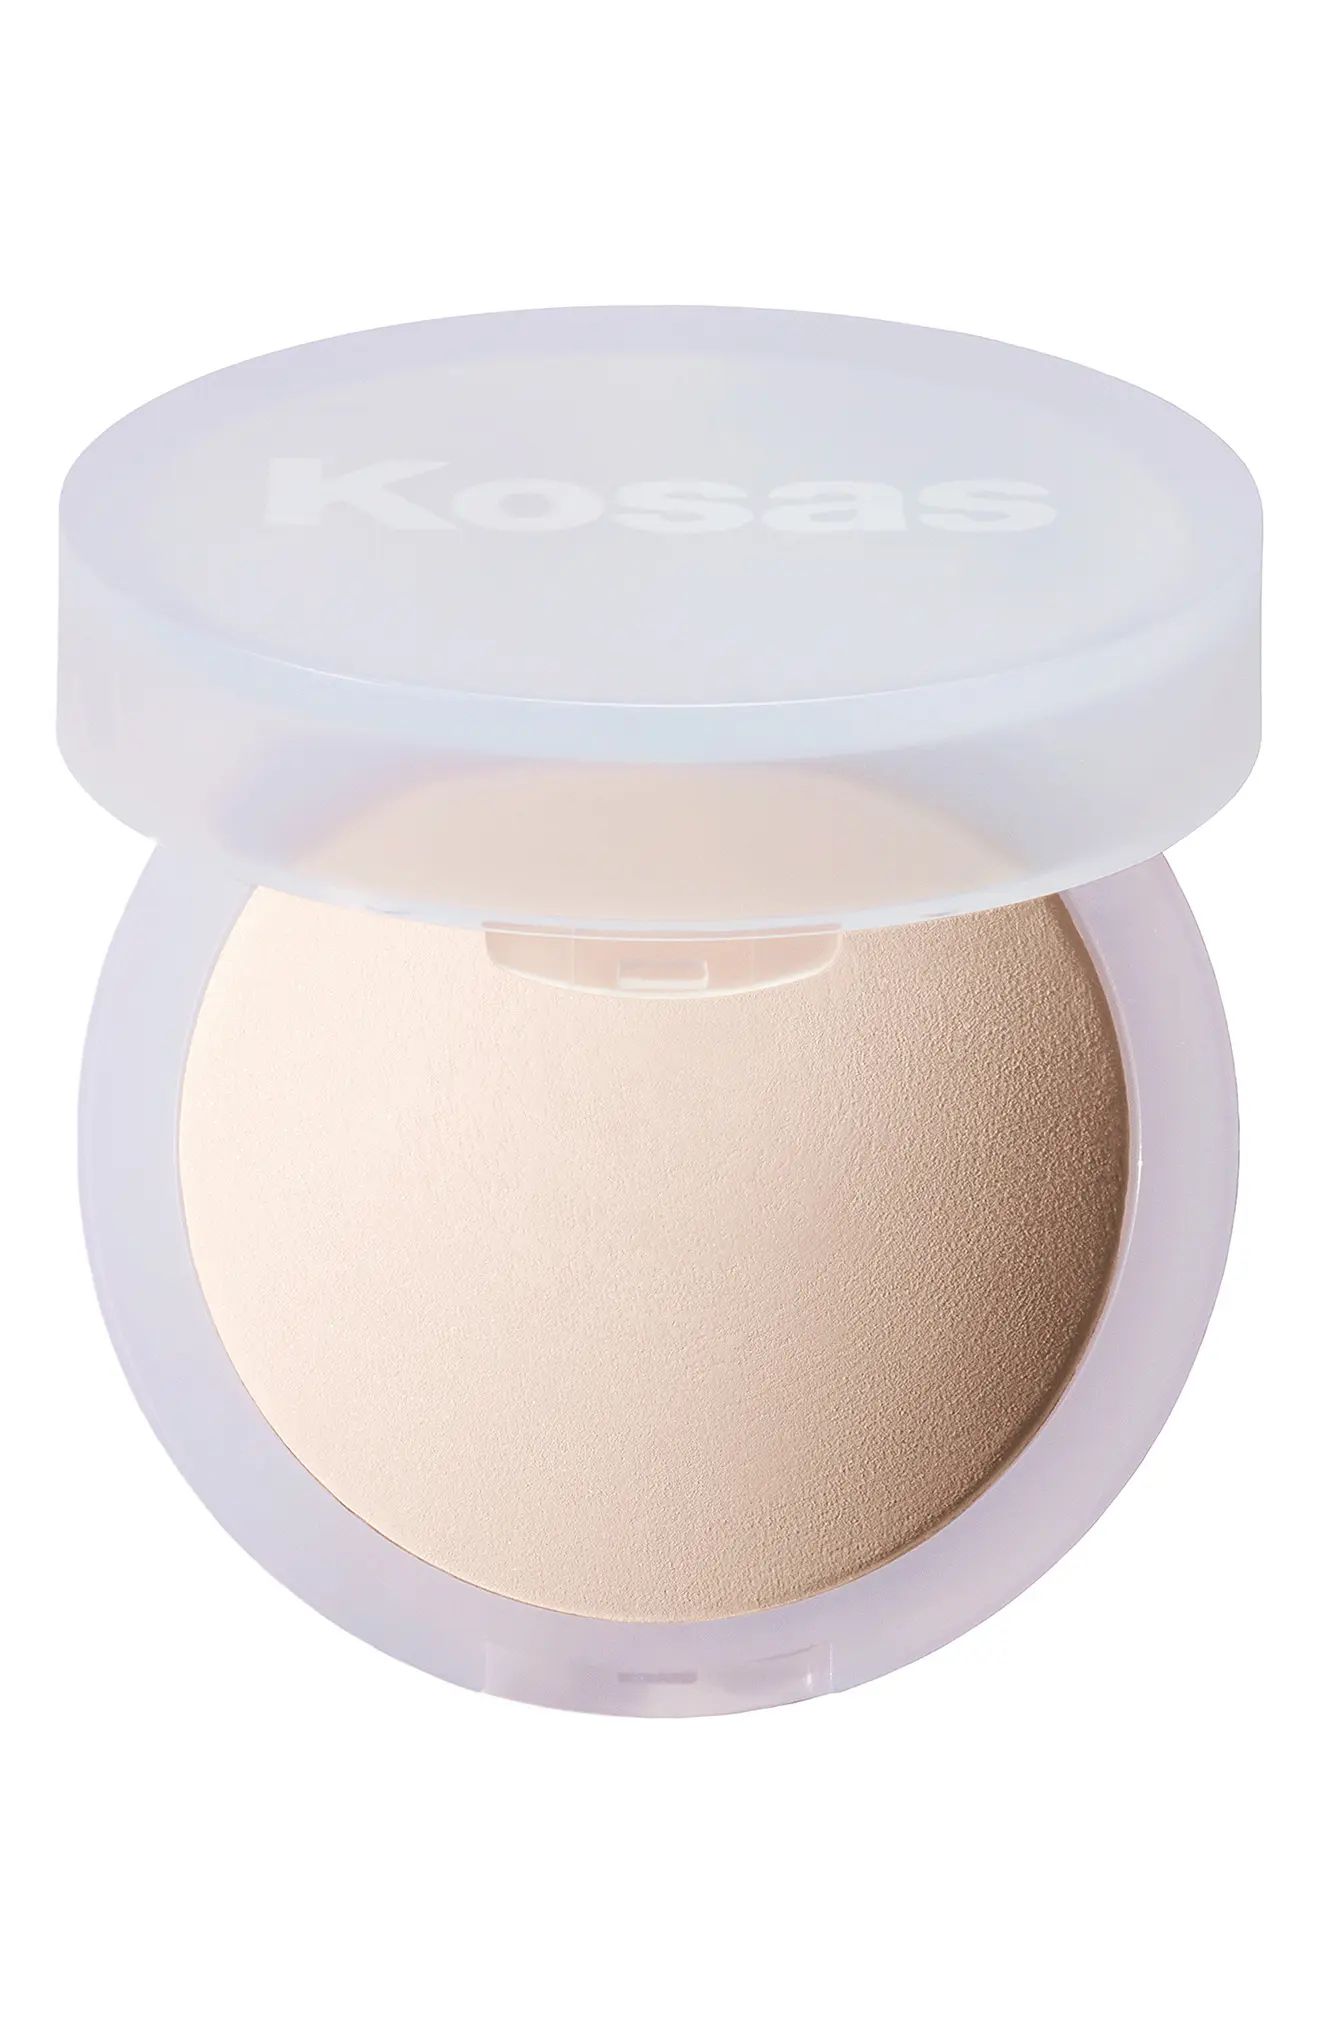 Kosas Cloud Set Baked Setting & Smoothing Powder in Airy at Nordstrom | Nordstrom